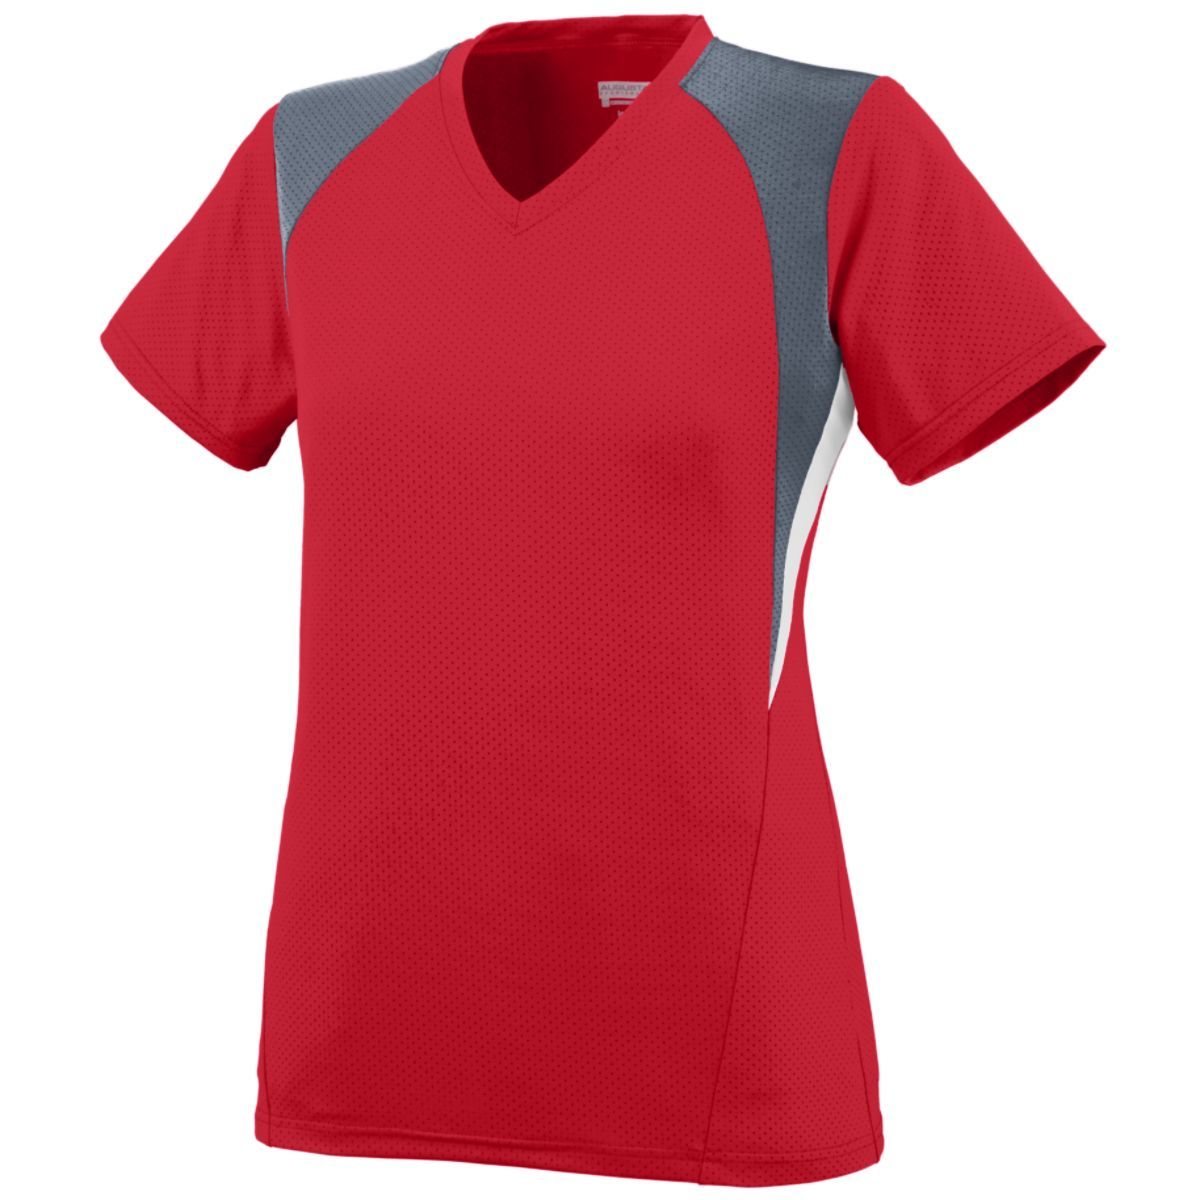 Augusta Sportswear Ladies Mystic Jersey in Red/Graphite/White  -Part of the Ladies, Ladies-Jersey, Augusta-Products, Soccer, Shirts, All-Sports-1 product lines at KanaleyCreations.com